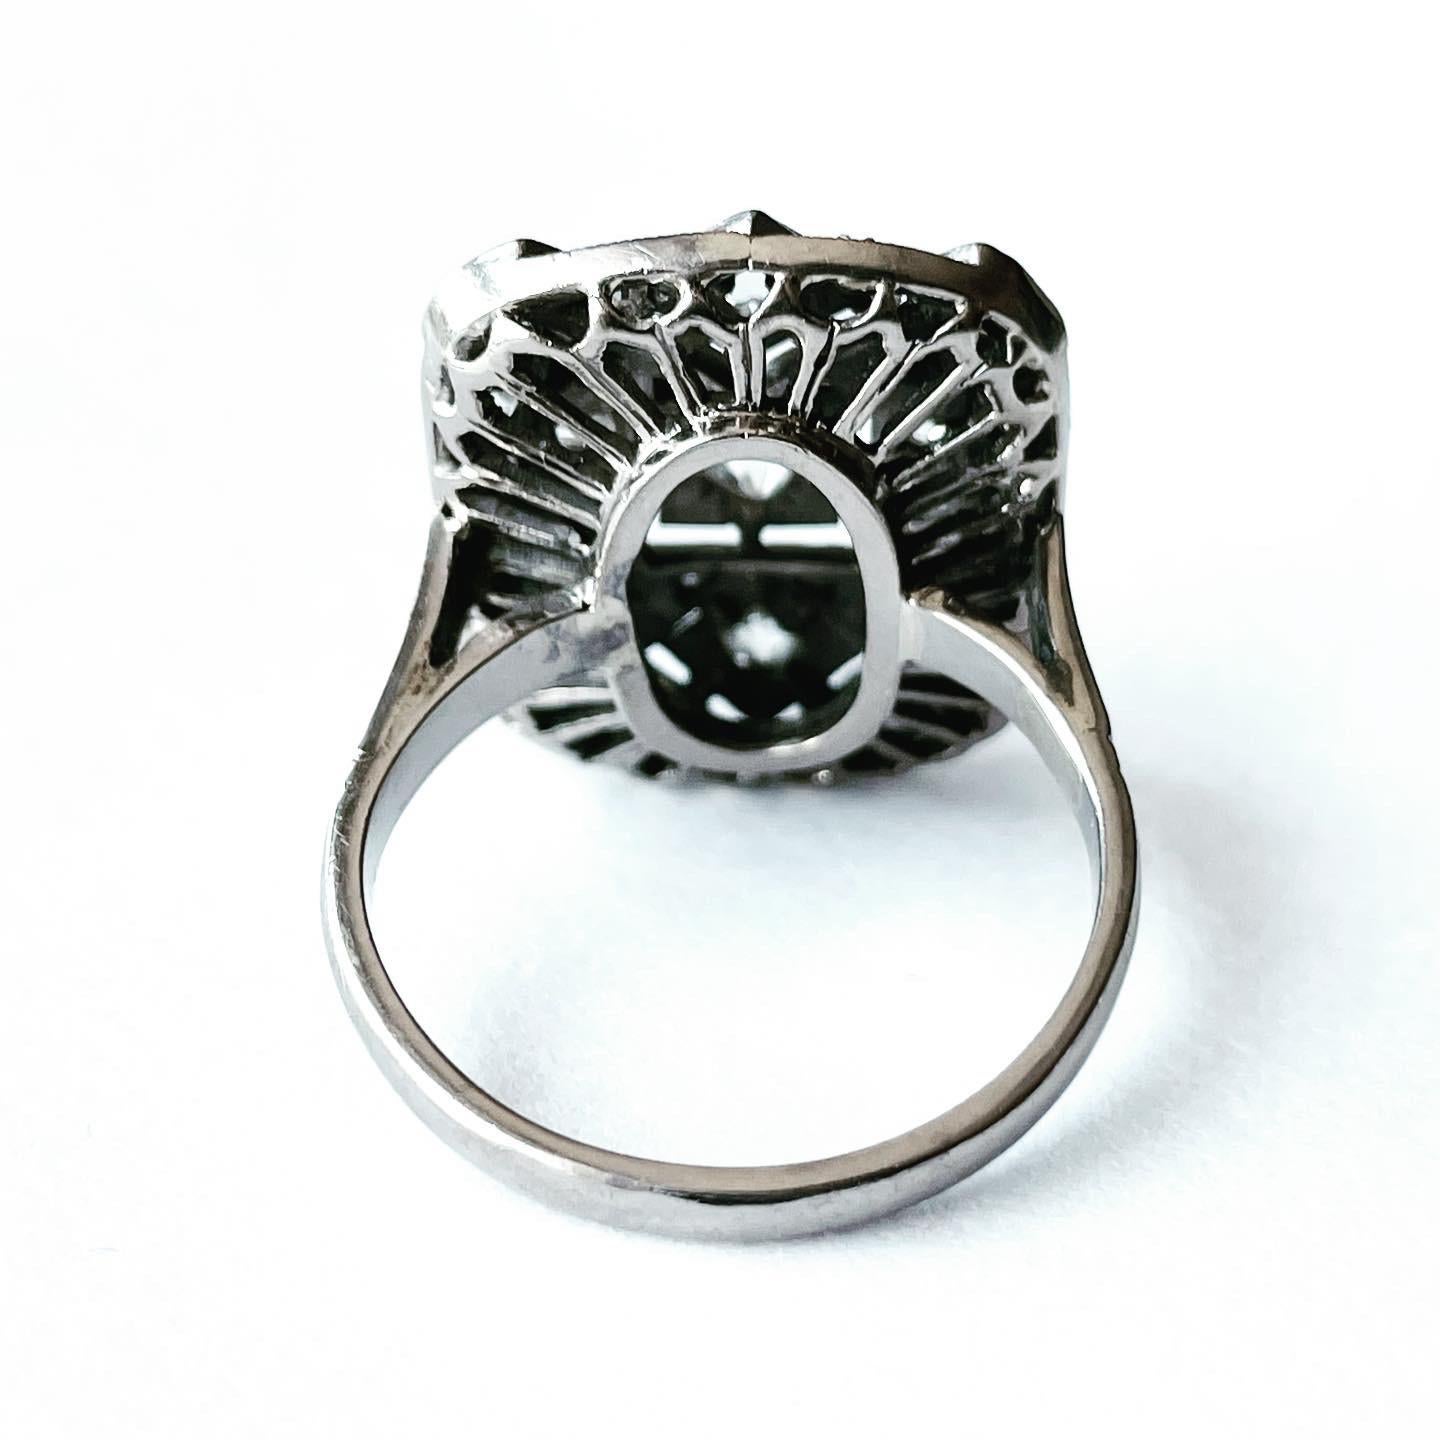 1920s style ring